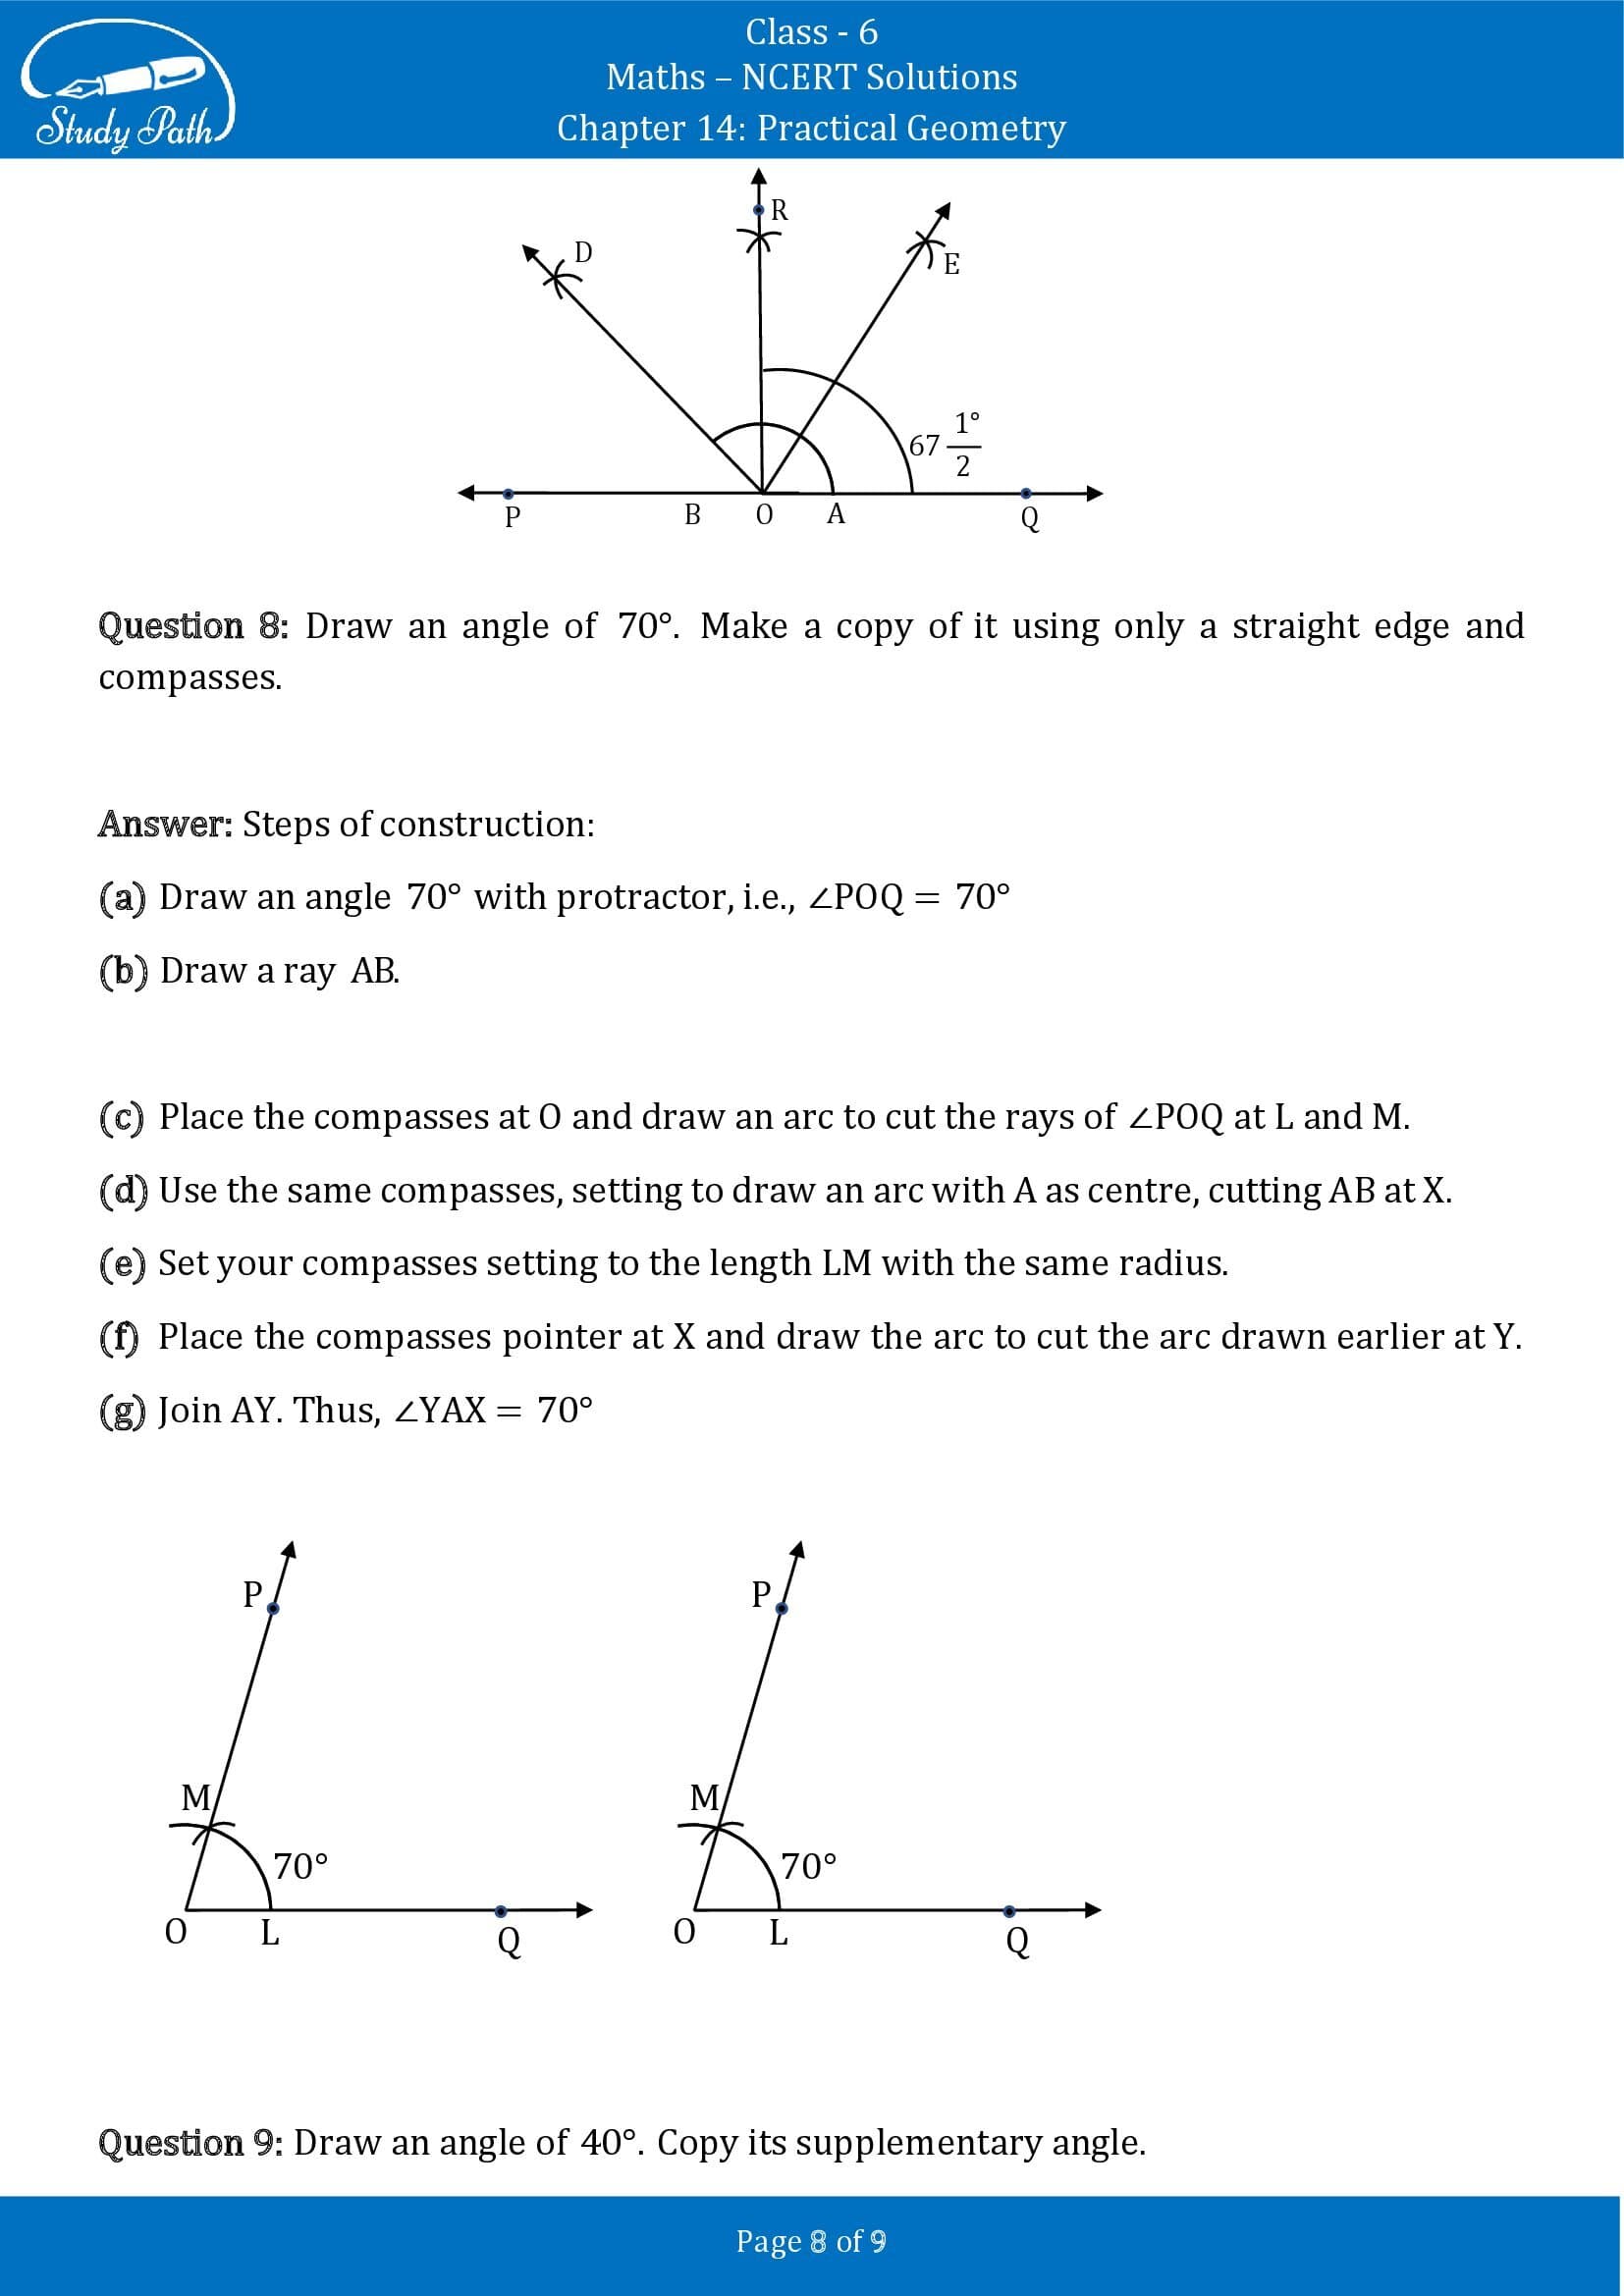 NCERT Solutions for Class 6 Maths Chapter 14 Practical Geometry Exercise 14.6 00008